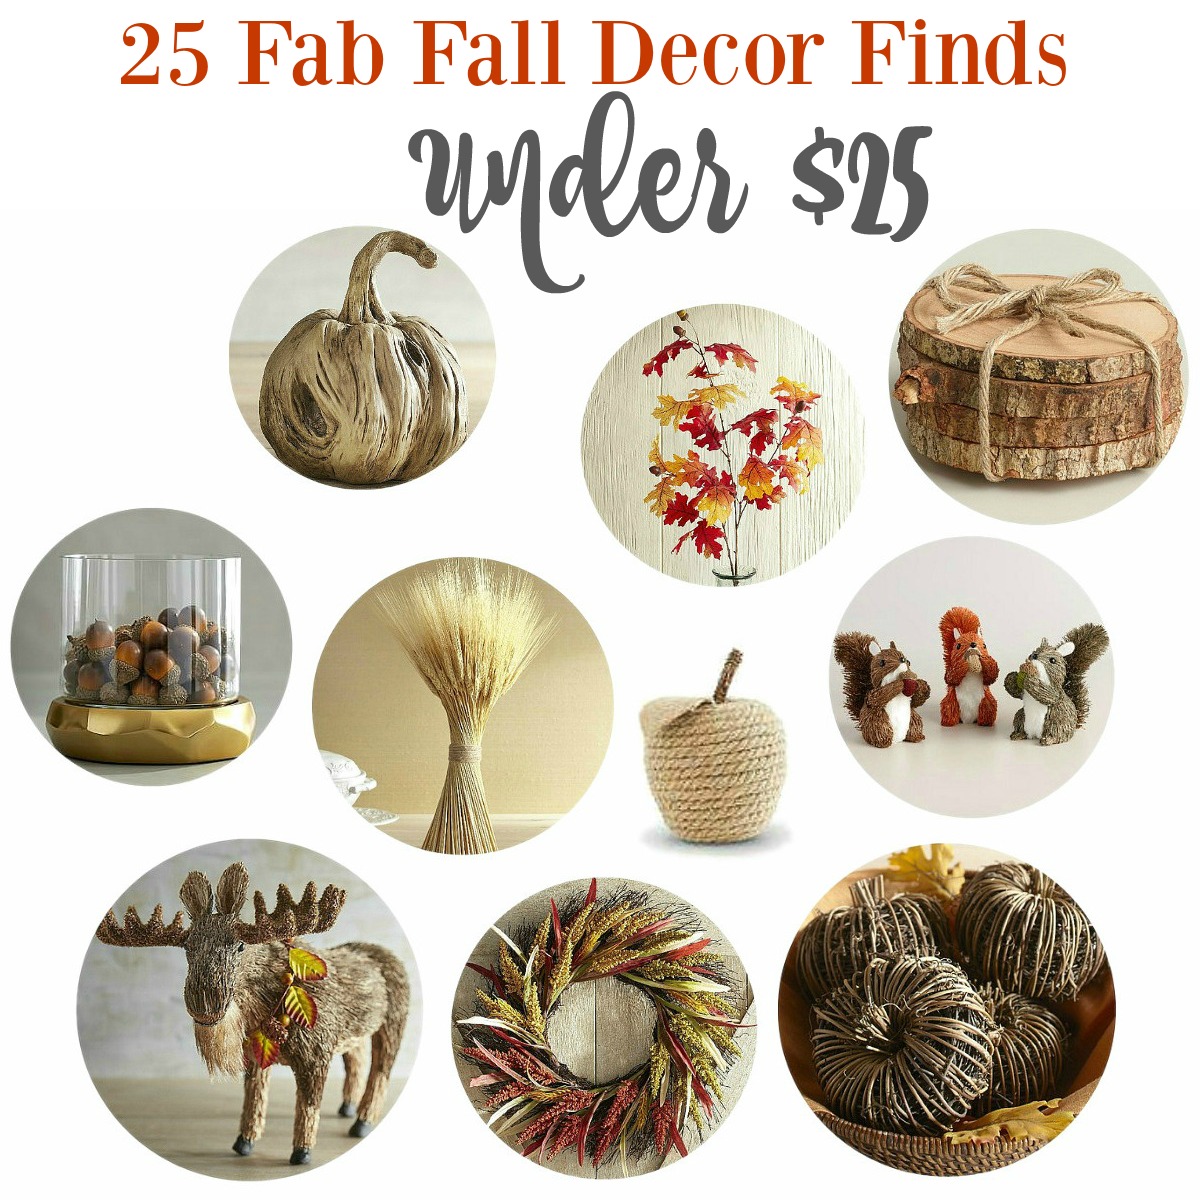 Friday’s Finds: 25 Fab Fall Decor Finds Under $25